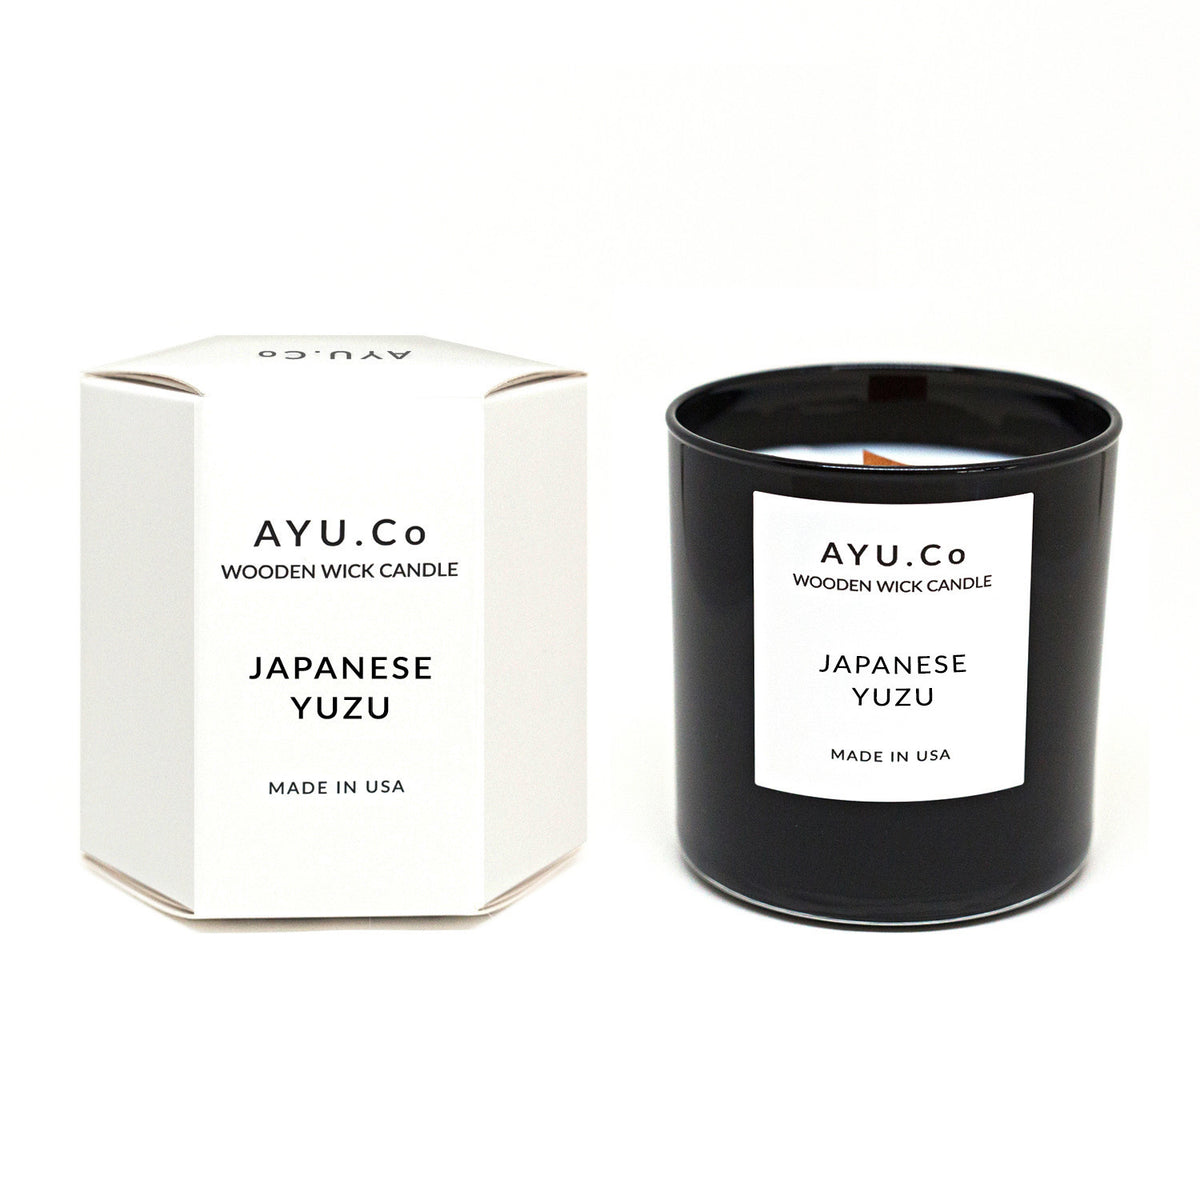 Japanese Yuzu Wooden Wick Candle